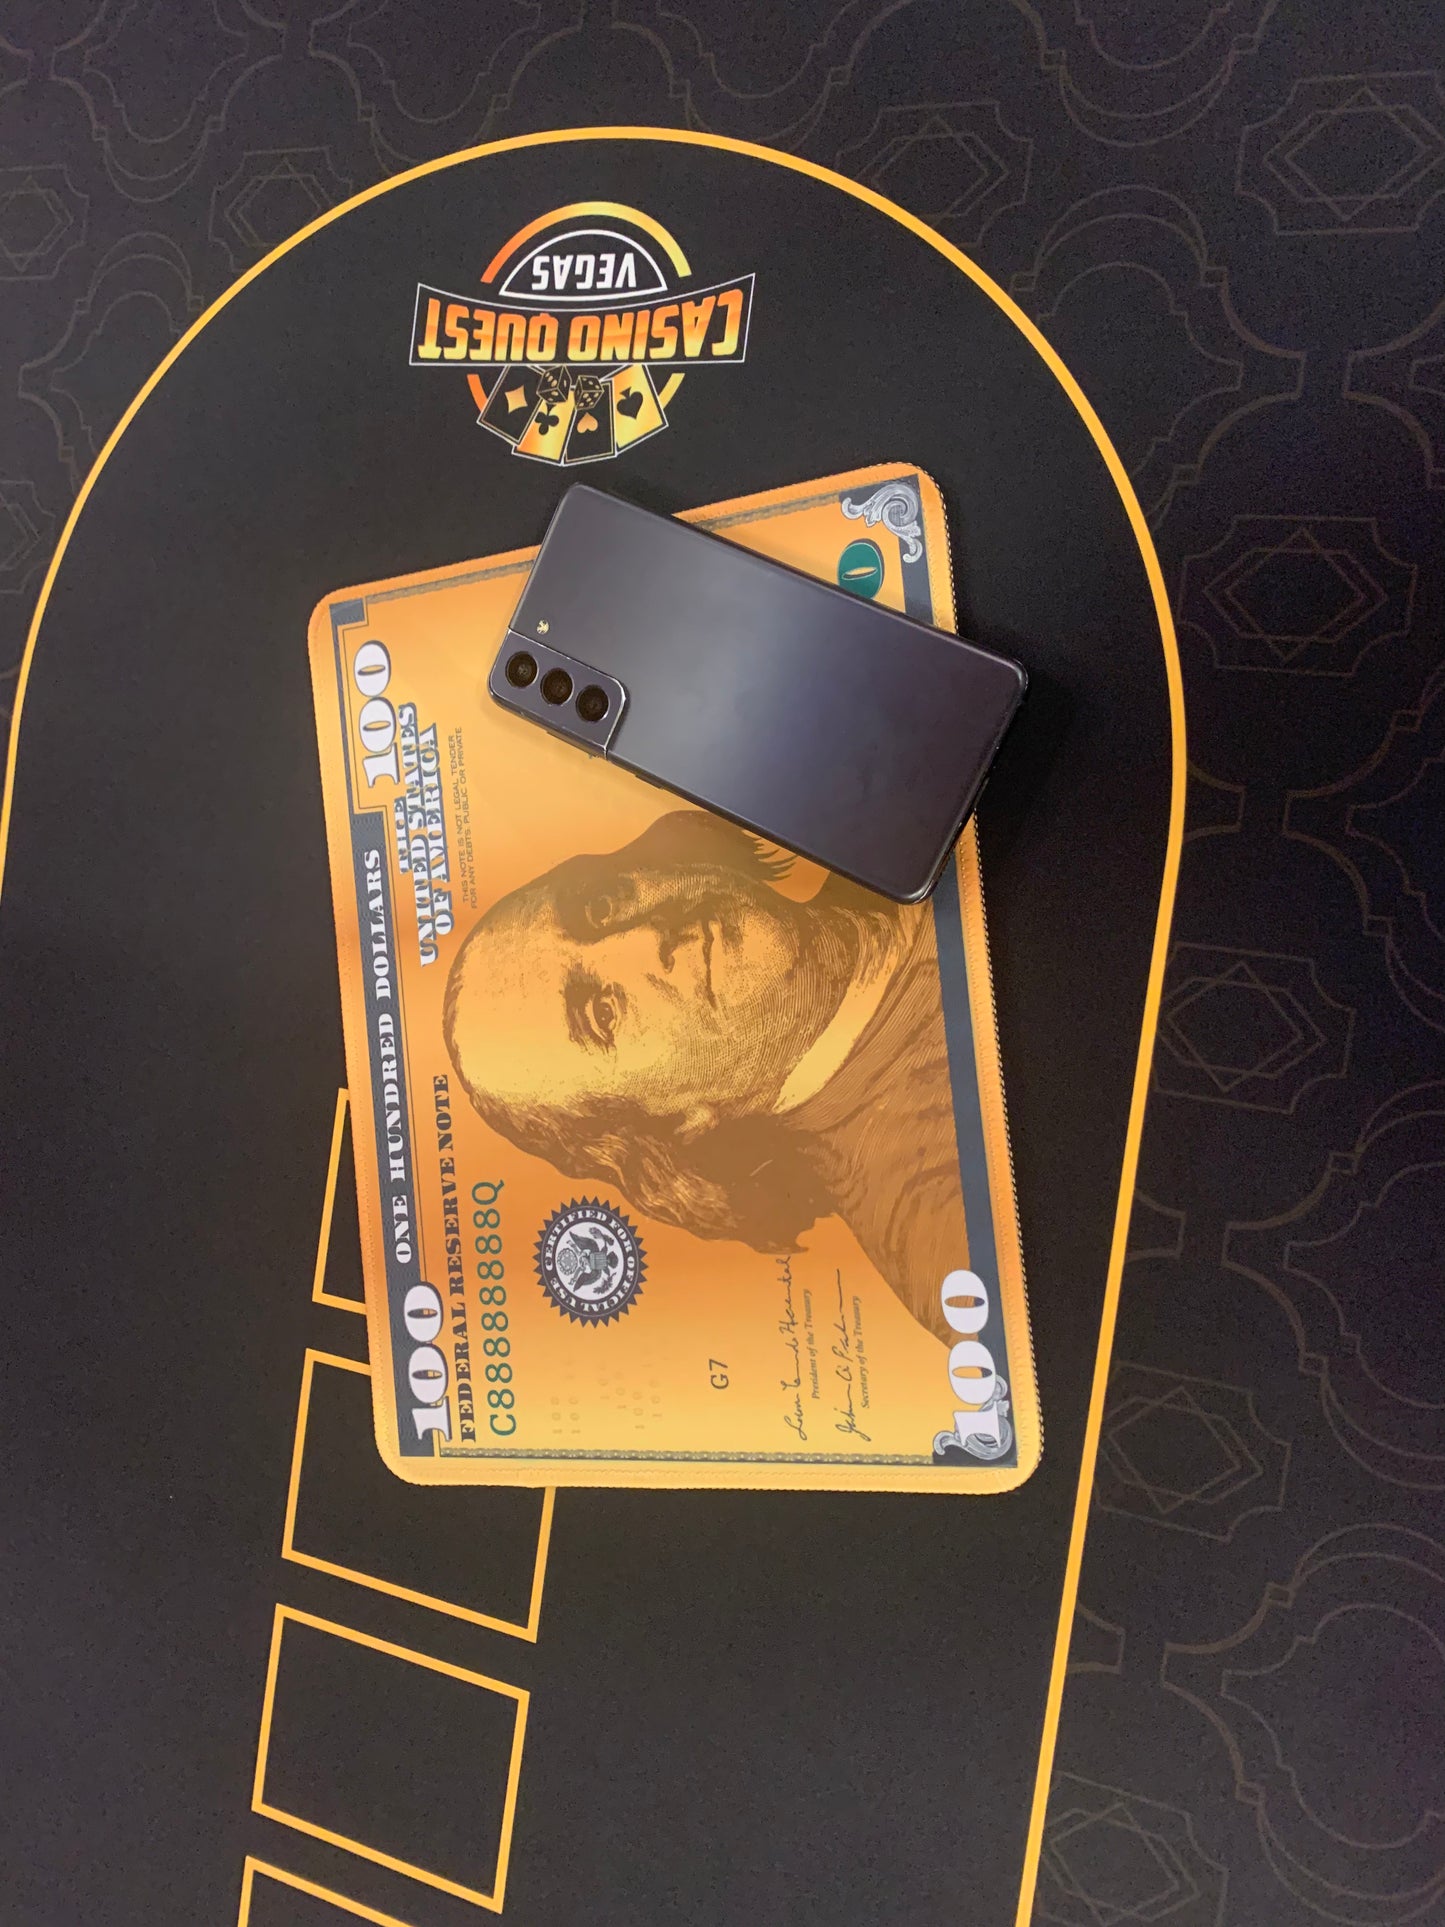 Gold $100 Bill Mouse Pad 11" x 8 "